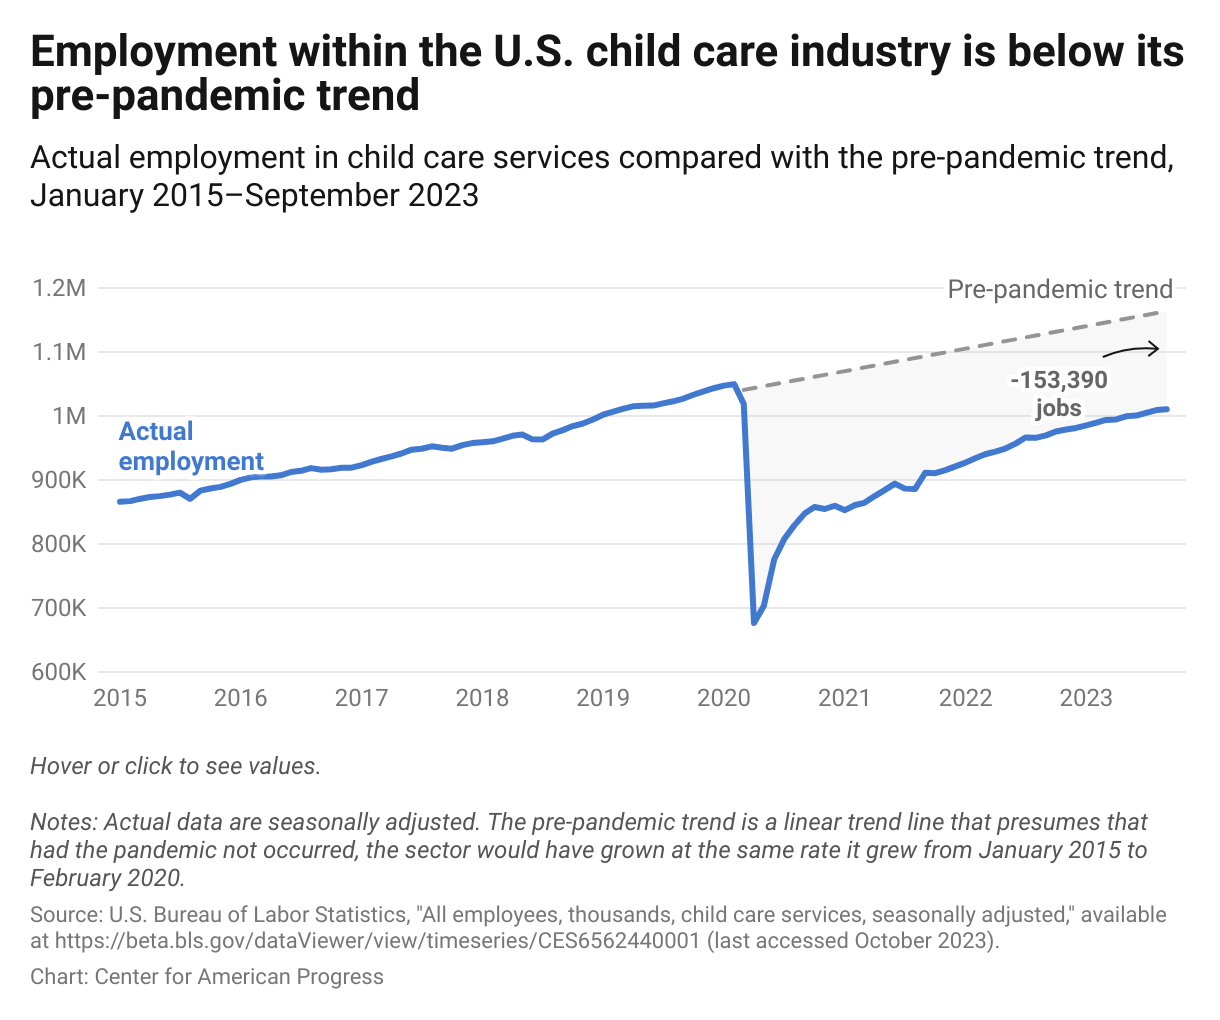 Line graph showing what employment within the child care industry was projected to be if it continued on its pre-pandemic trajectory and the pandemic recession never took place. 